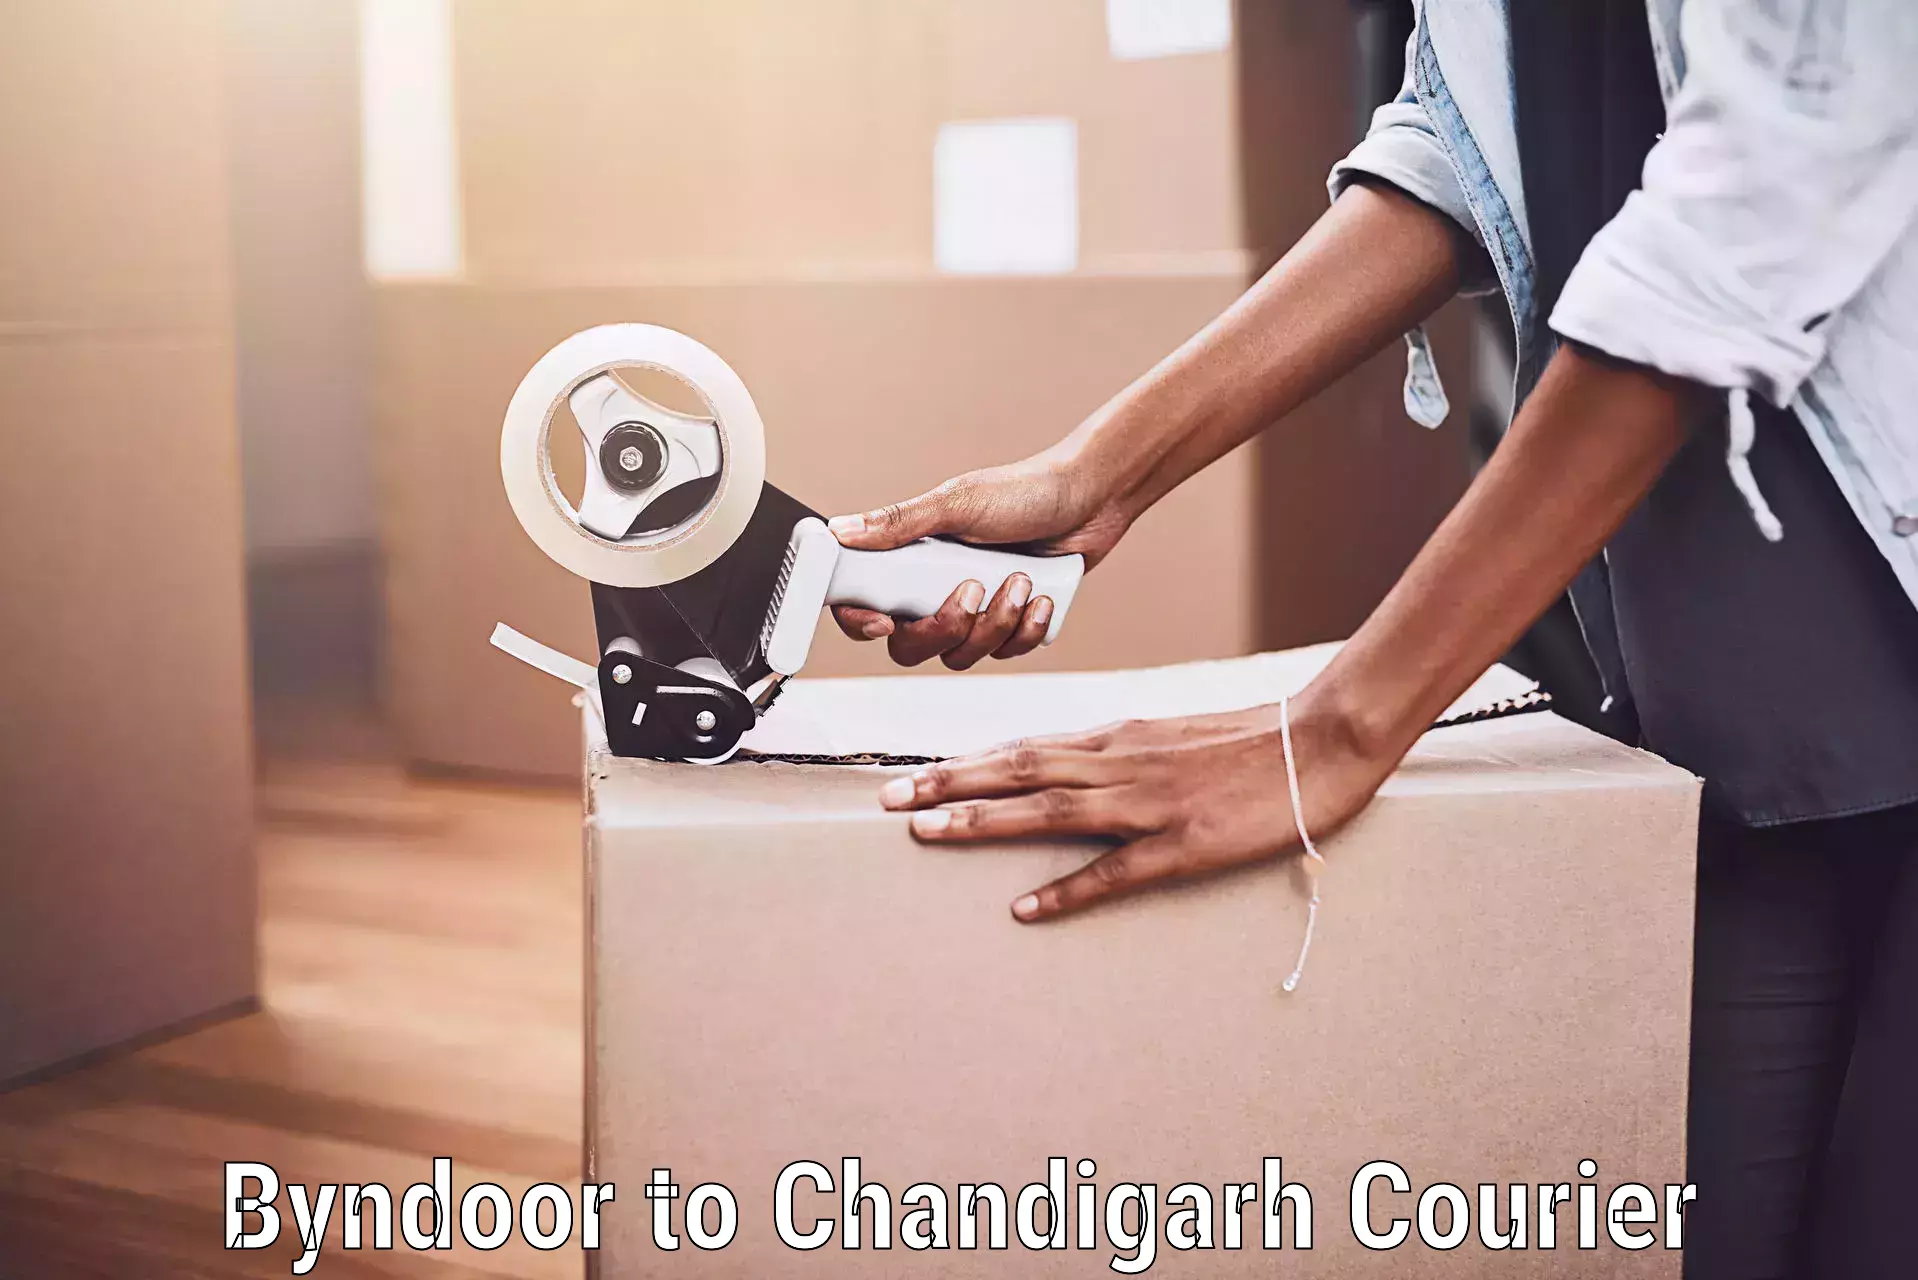 Automated luggage transport Byndoor to Chandigarh